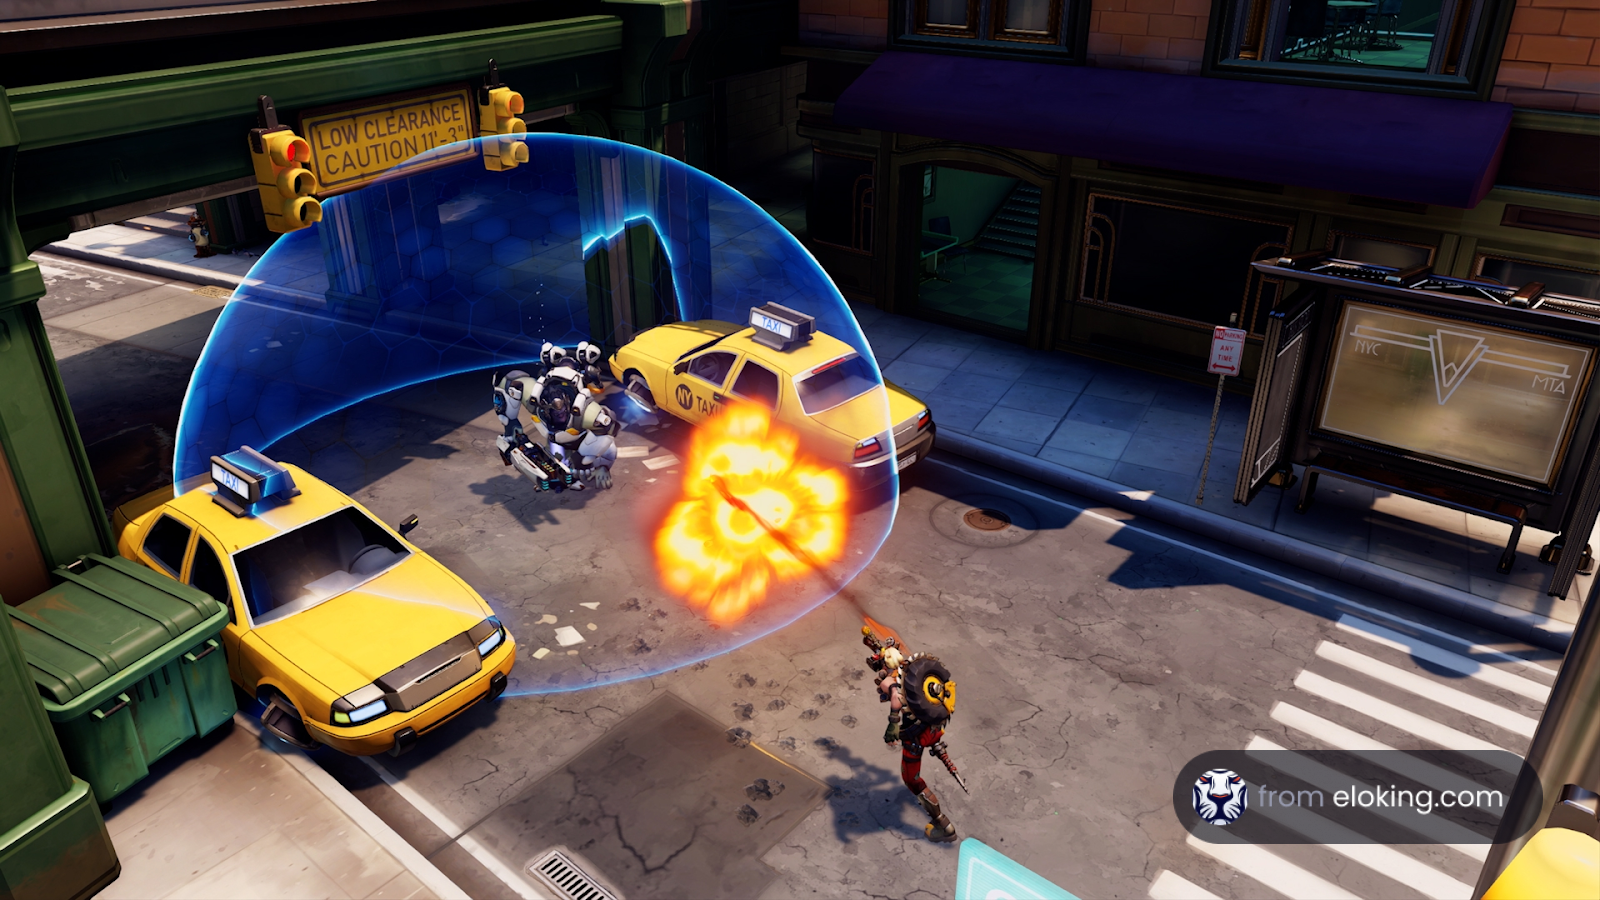 Video game characters engaging in a battle on a NYC street, with one character firing while protected by a futuristic shield